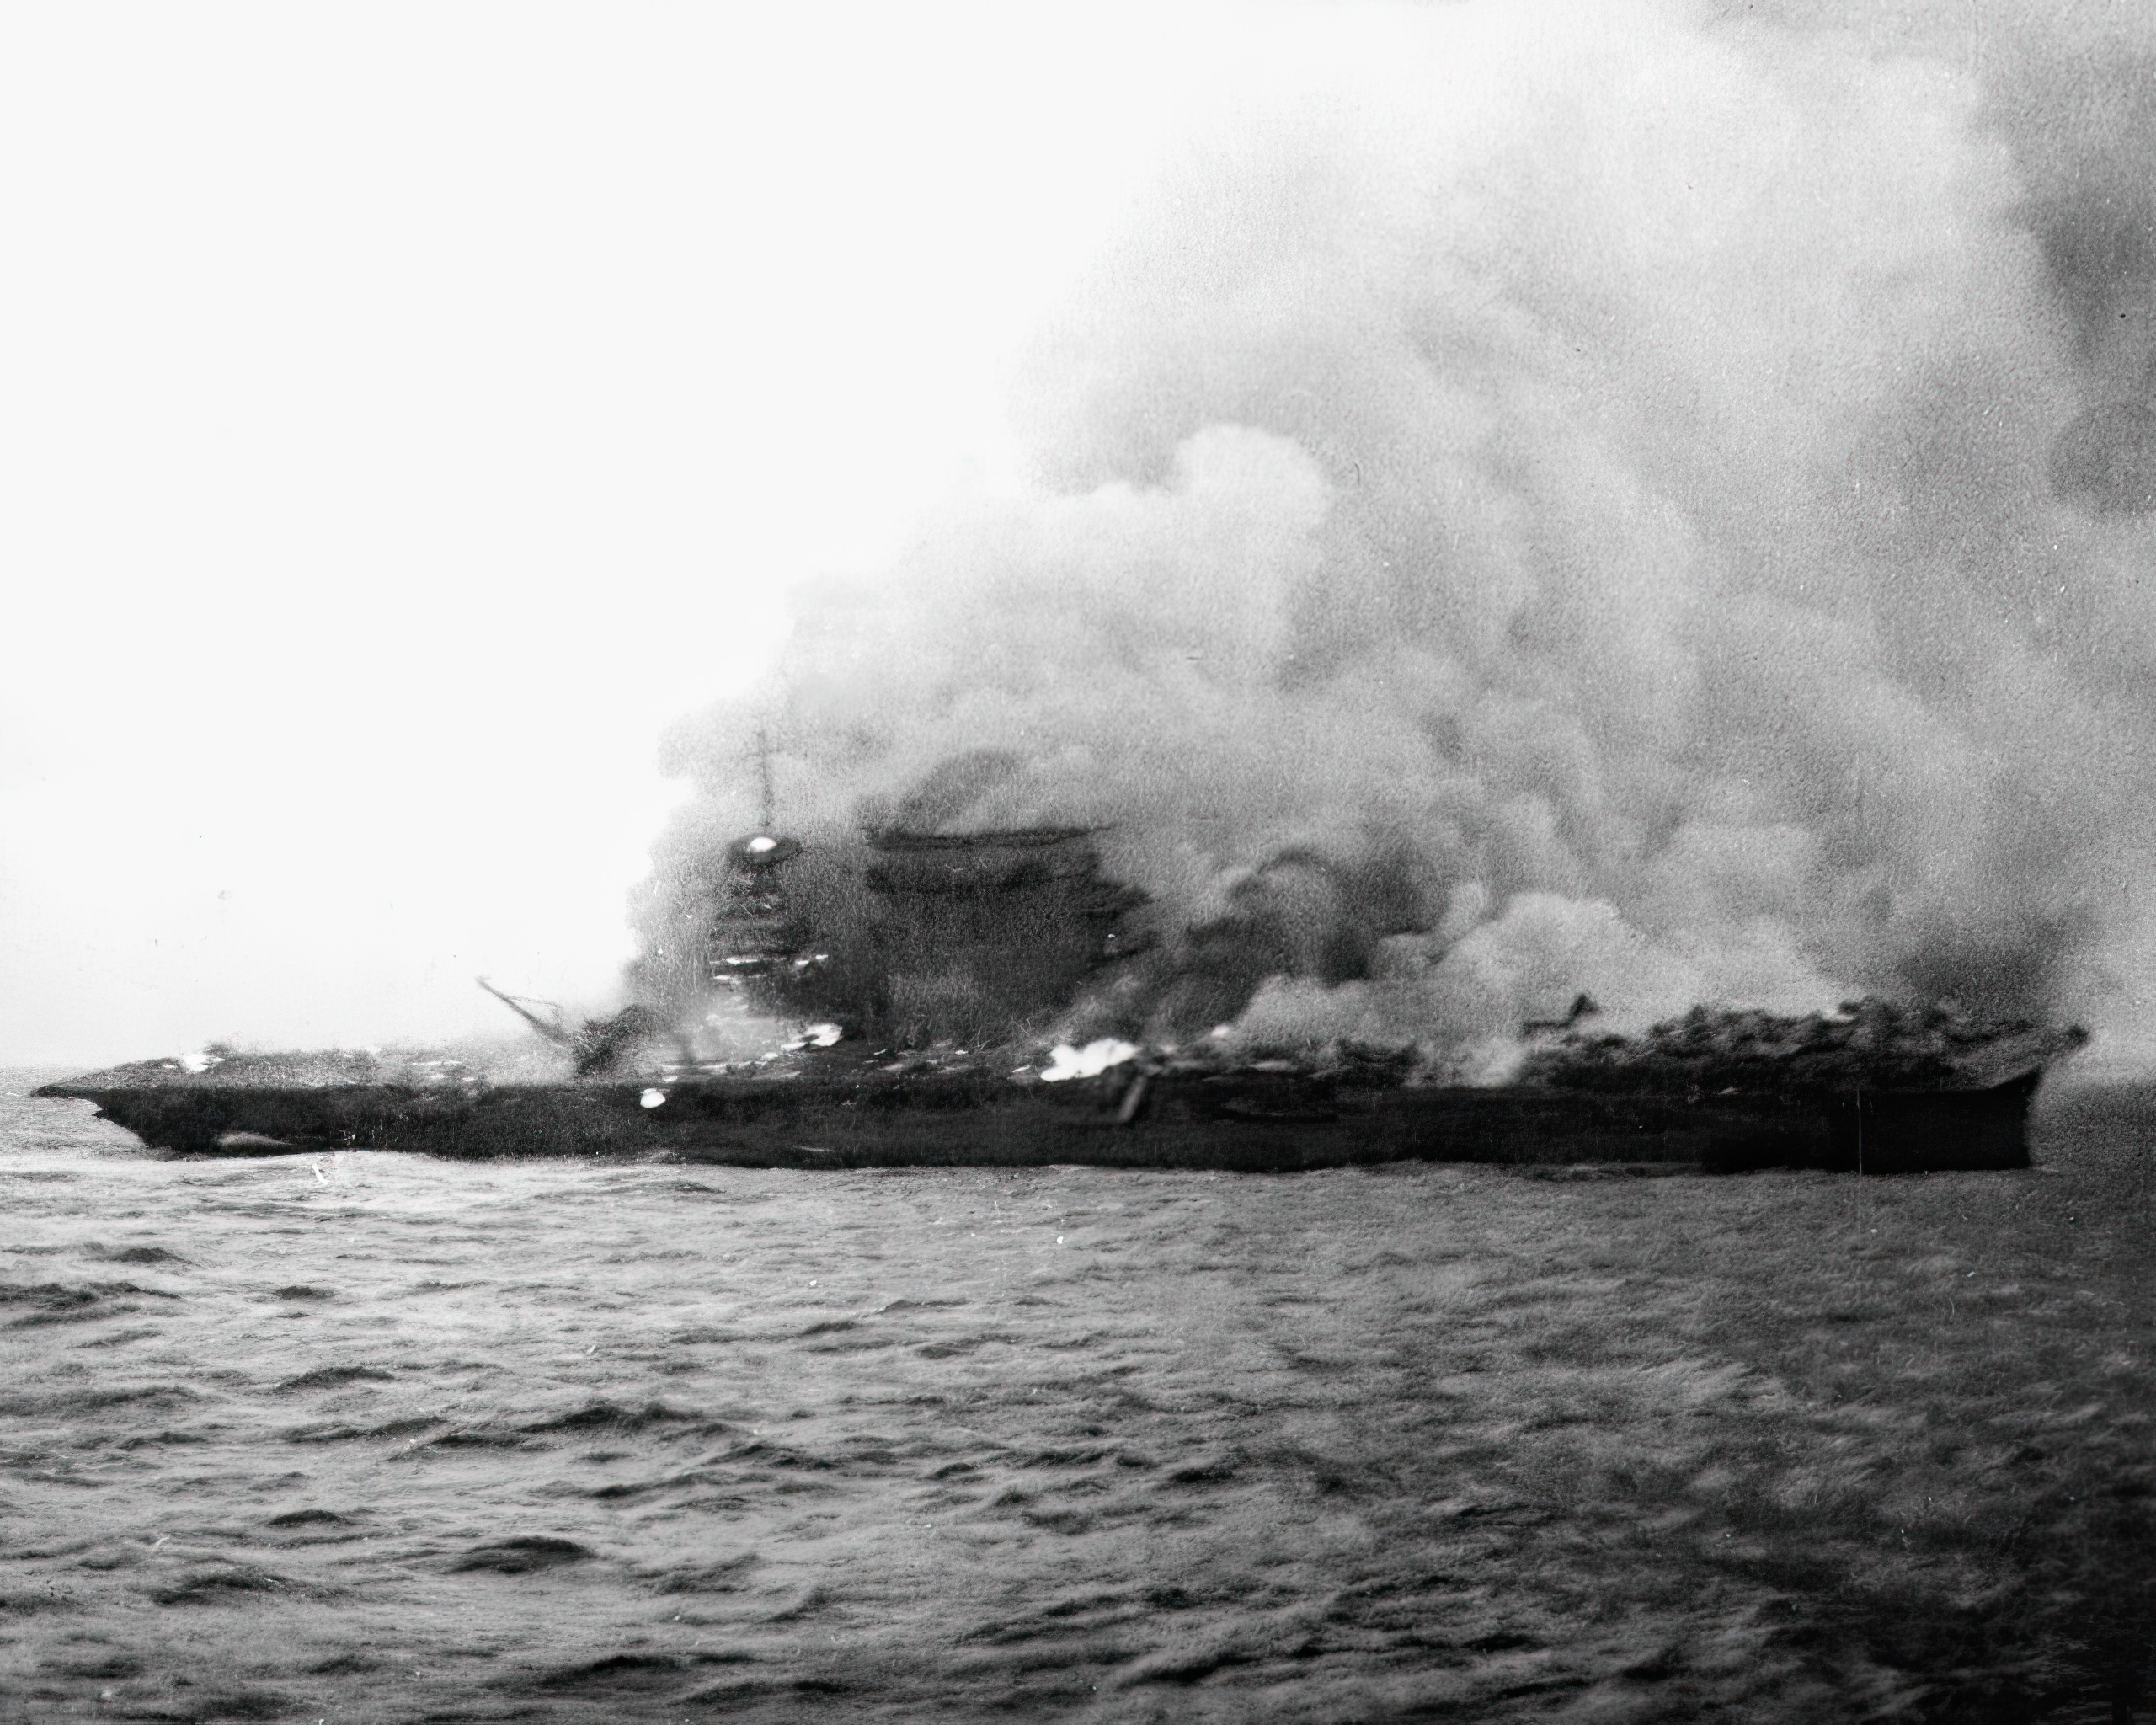 The U.S. Navy aircraft carrier USS Lexington (CV-2), burning and sinking after her crew abandoned ship during the Battle of the Coral Sea, 8 May 1942. Note the planes parked aft, where the fires have not yet reached